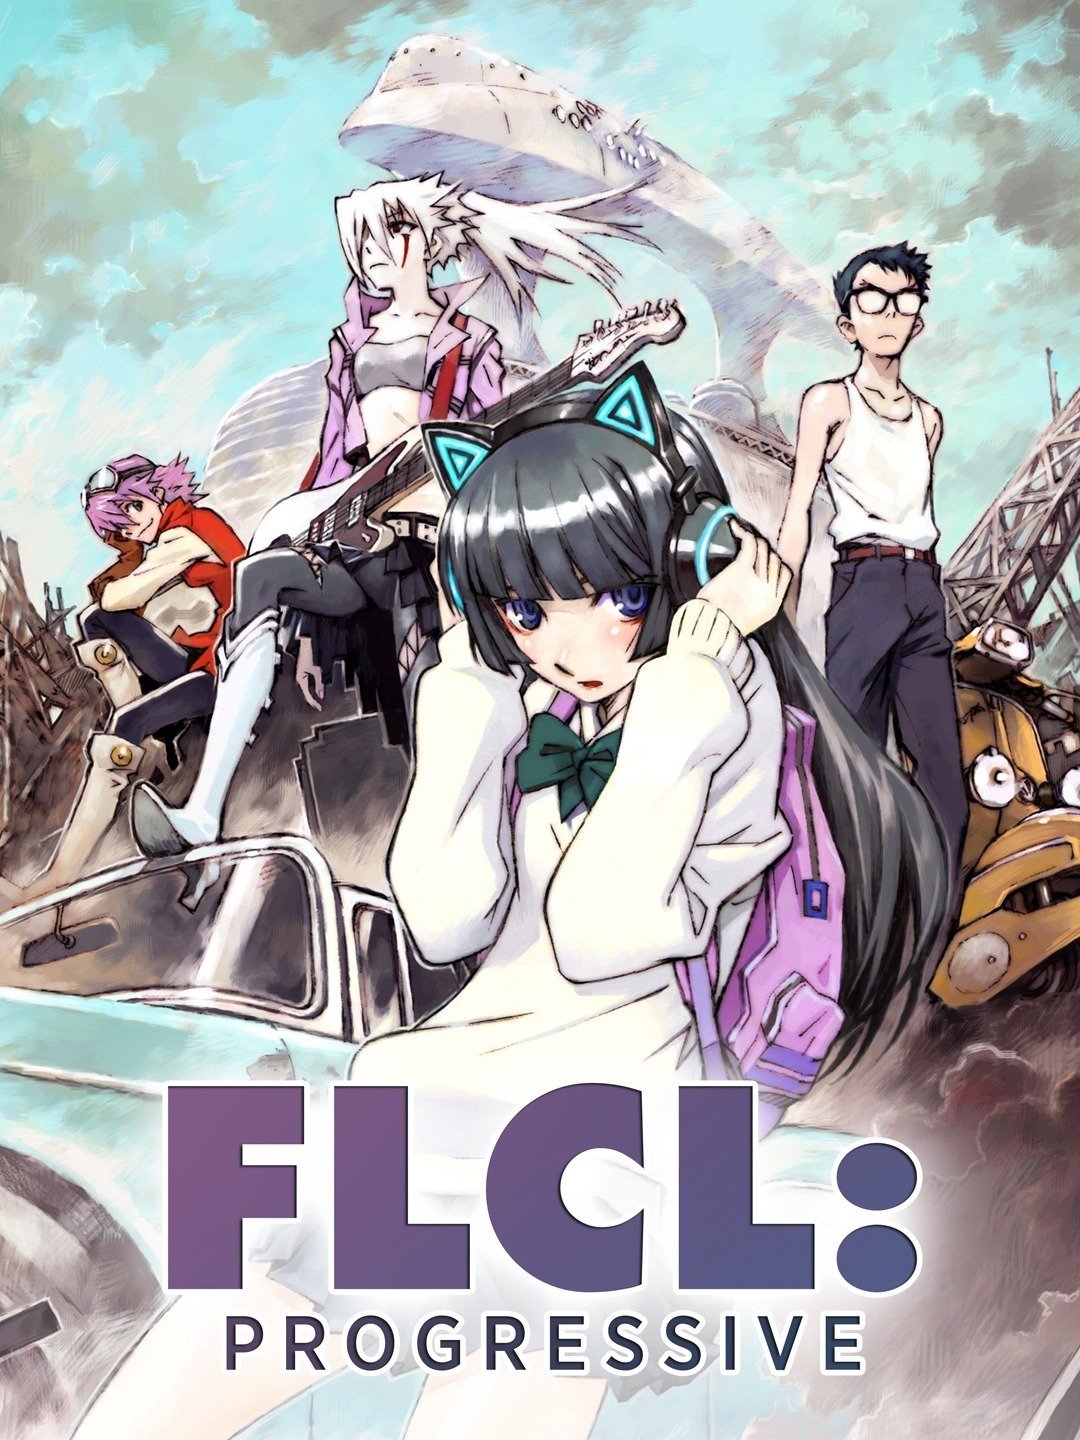 Fooly Cooly FLCL Review  The Messiah of Humanity